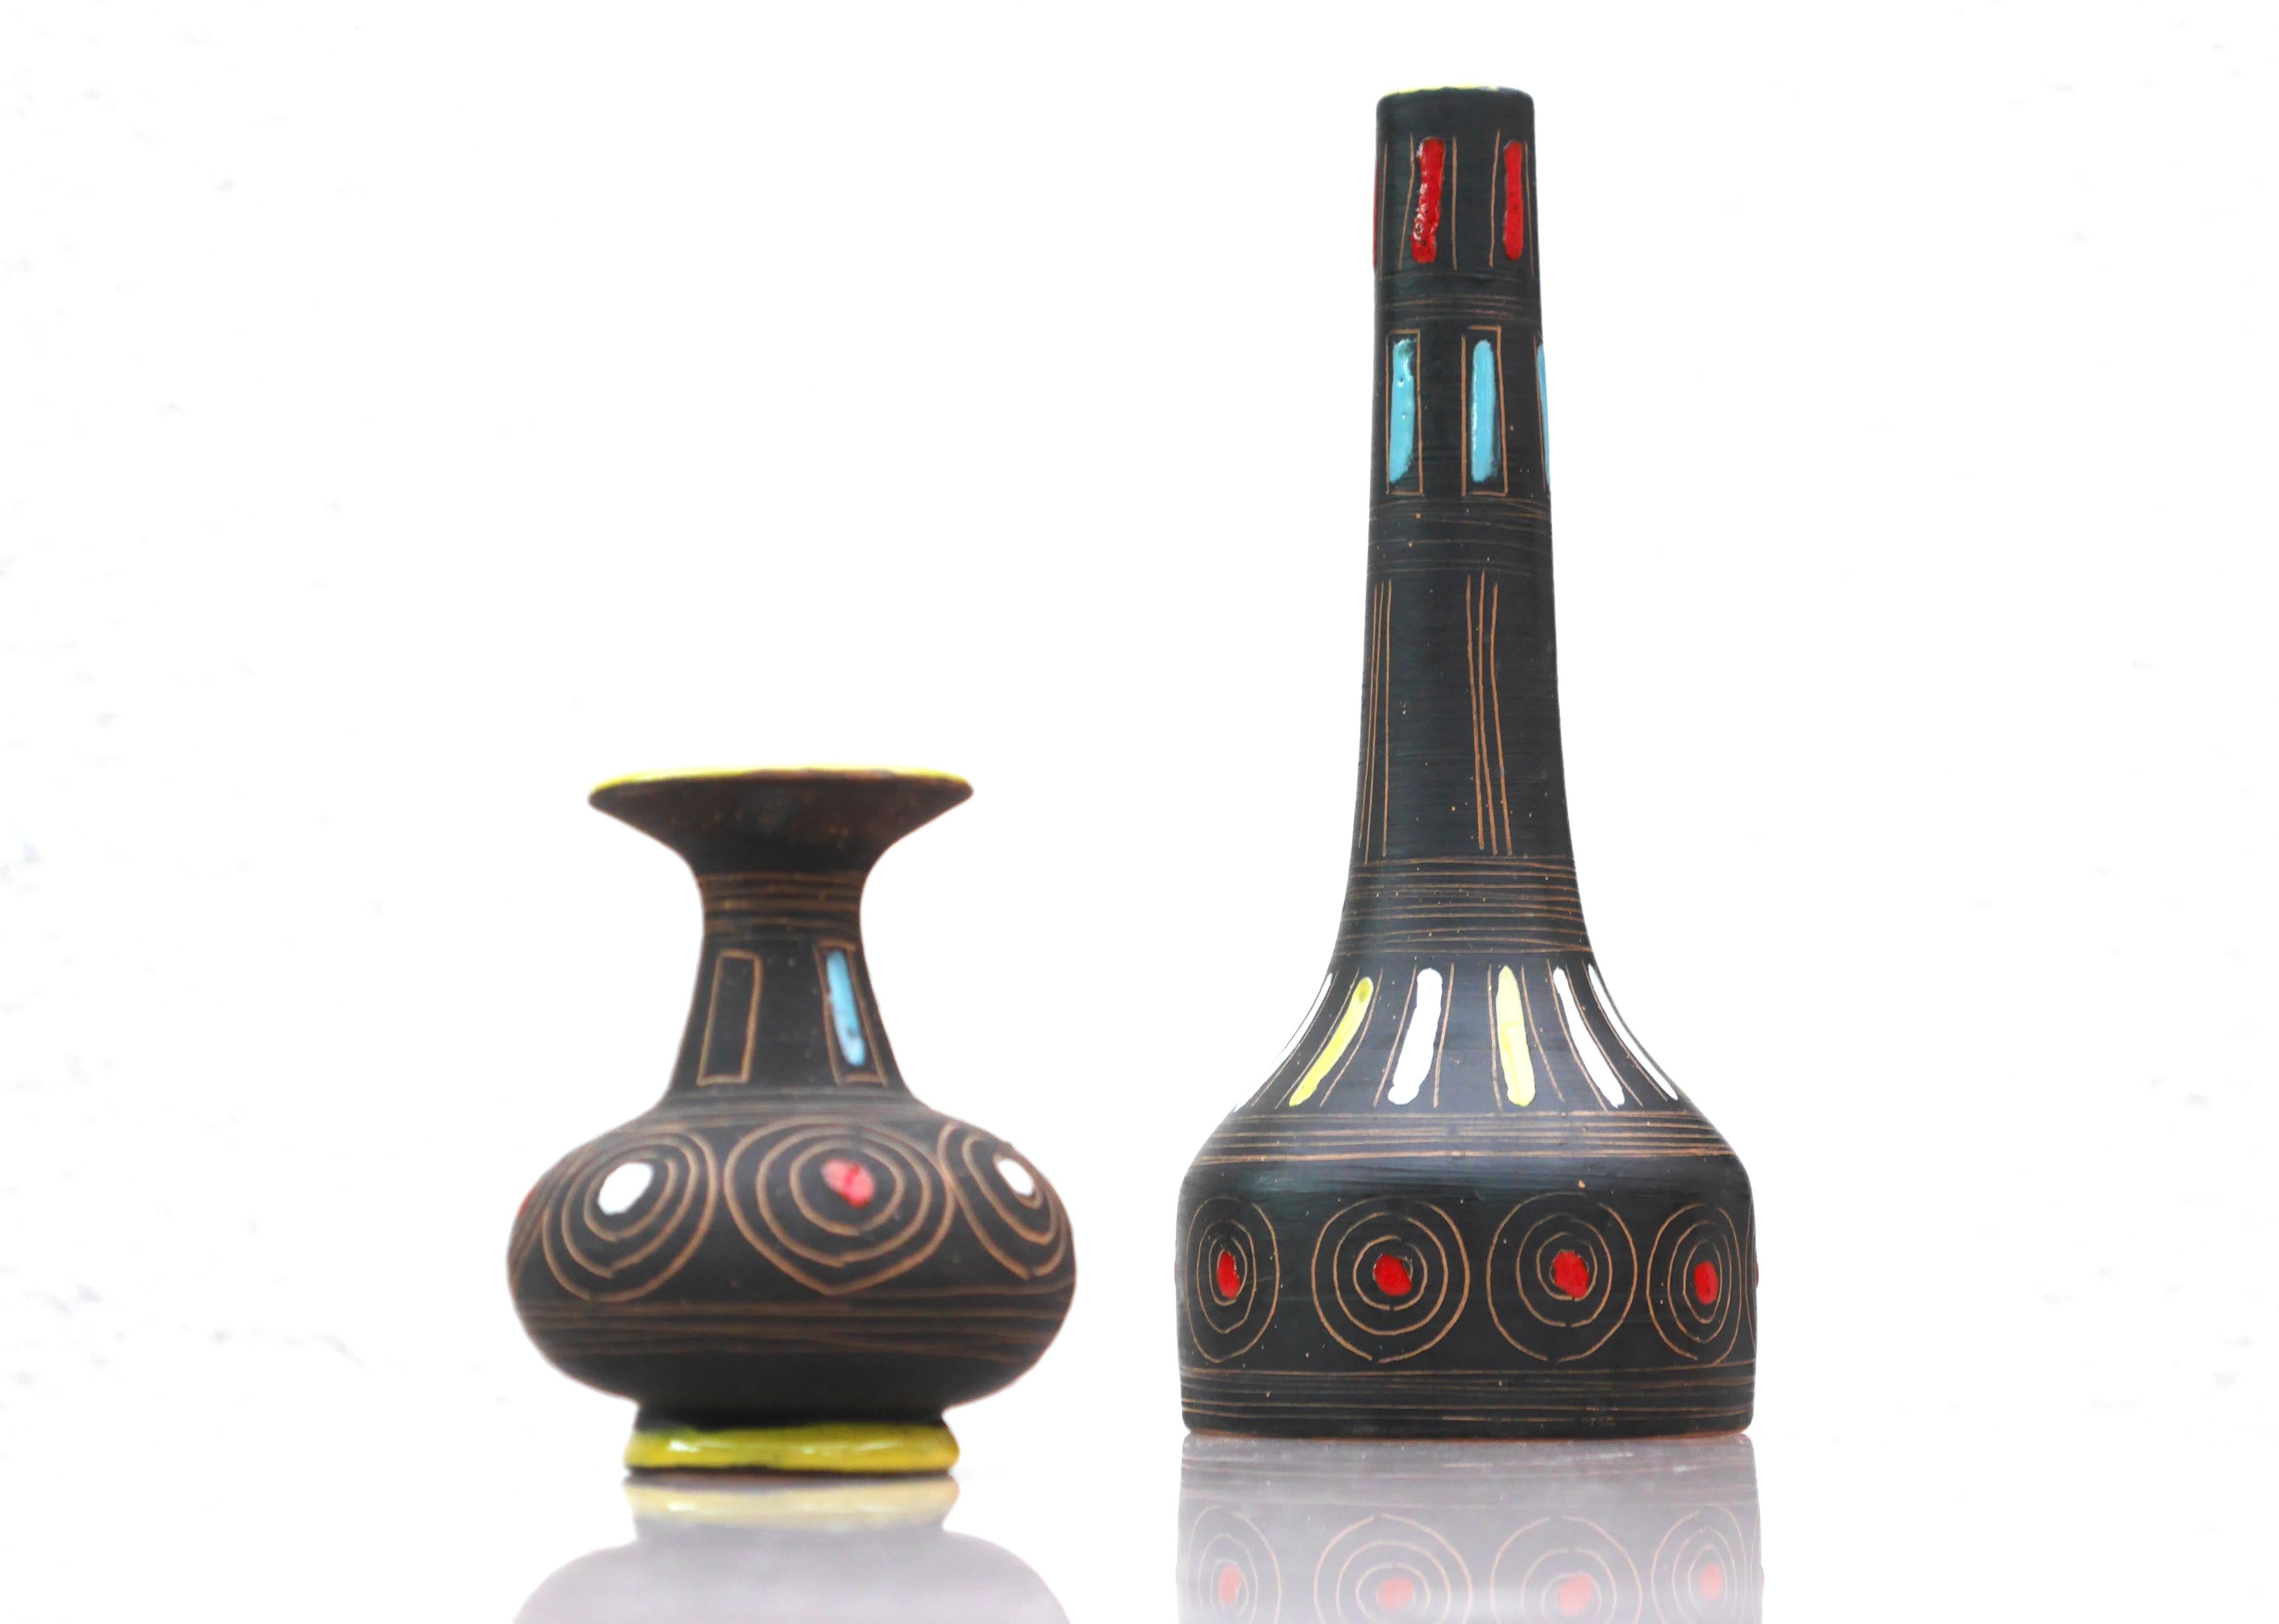 A pair of fantastic vintage ceramic vases from Fratelli Fanciullacci, Italy. These vases have a fantastic shape and decoration. The design is classic, clean lines and shapes has a similarity to Etruscan art. This gives them a rustic look combined